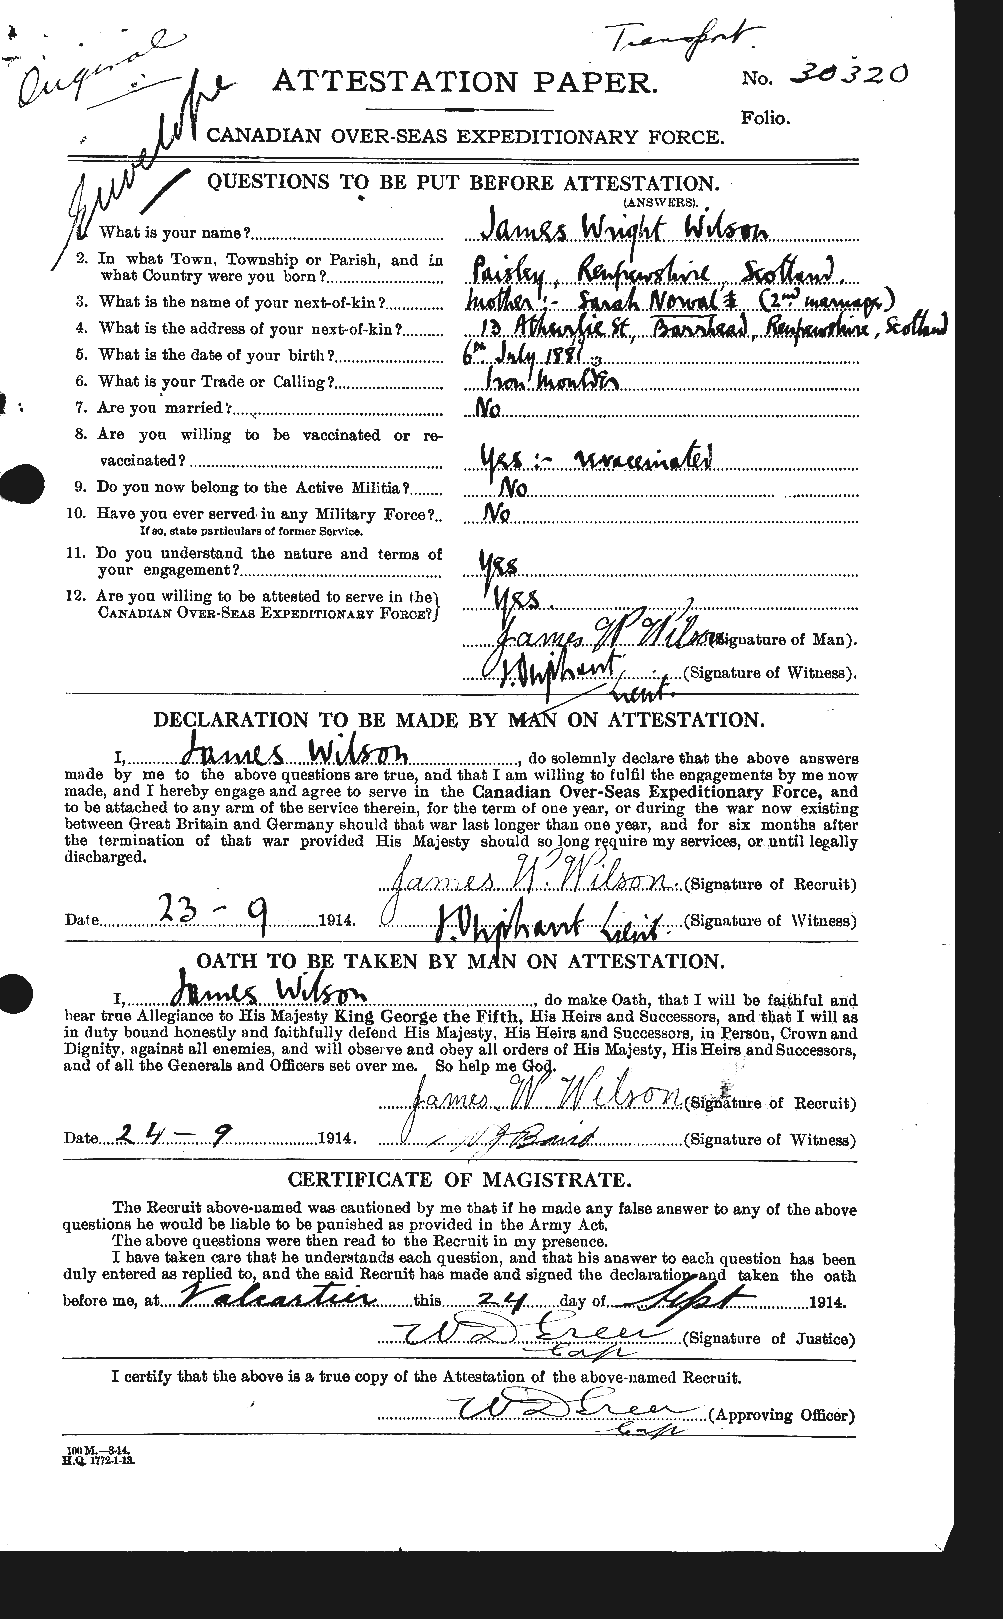 Personnel Records of the First World War - CEF 681516a